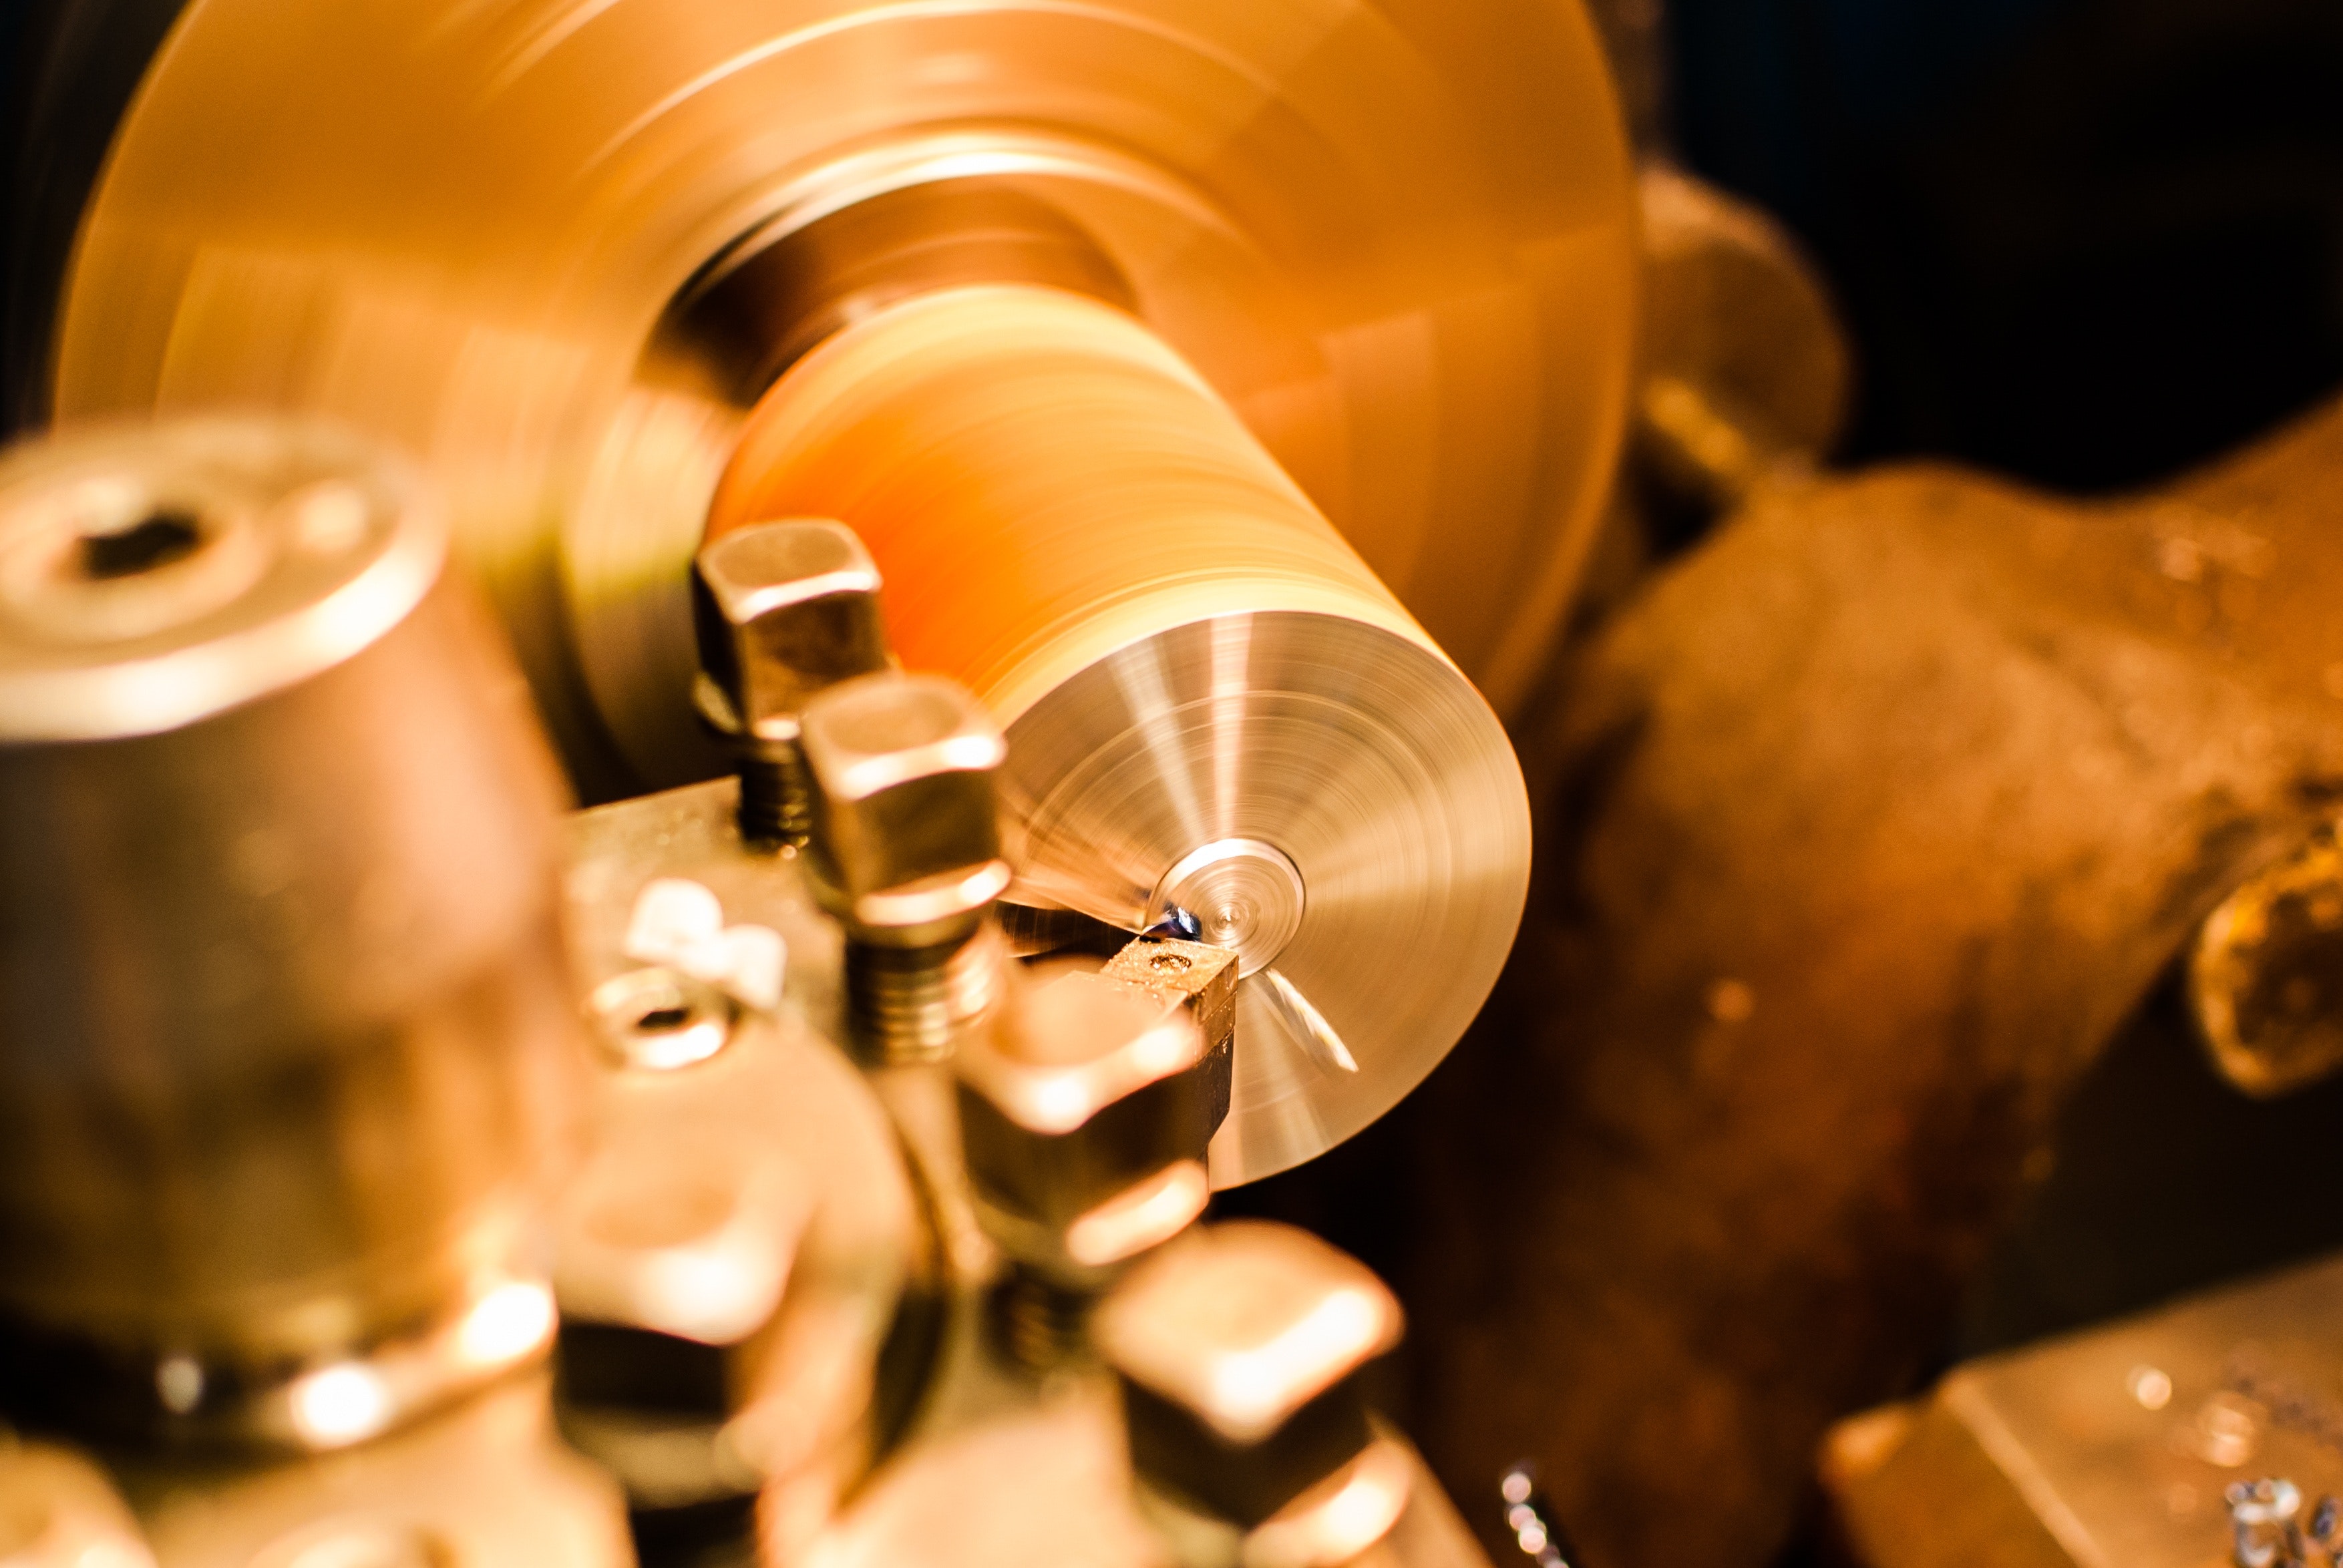 Image of a steel lathe.